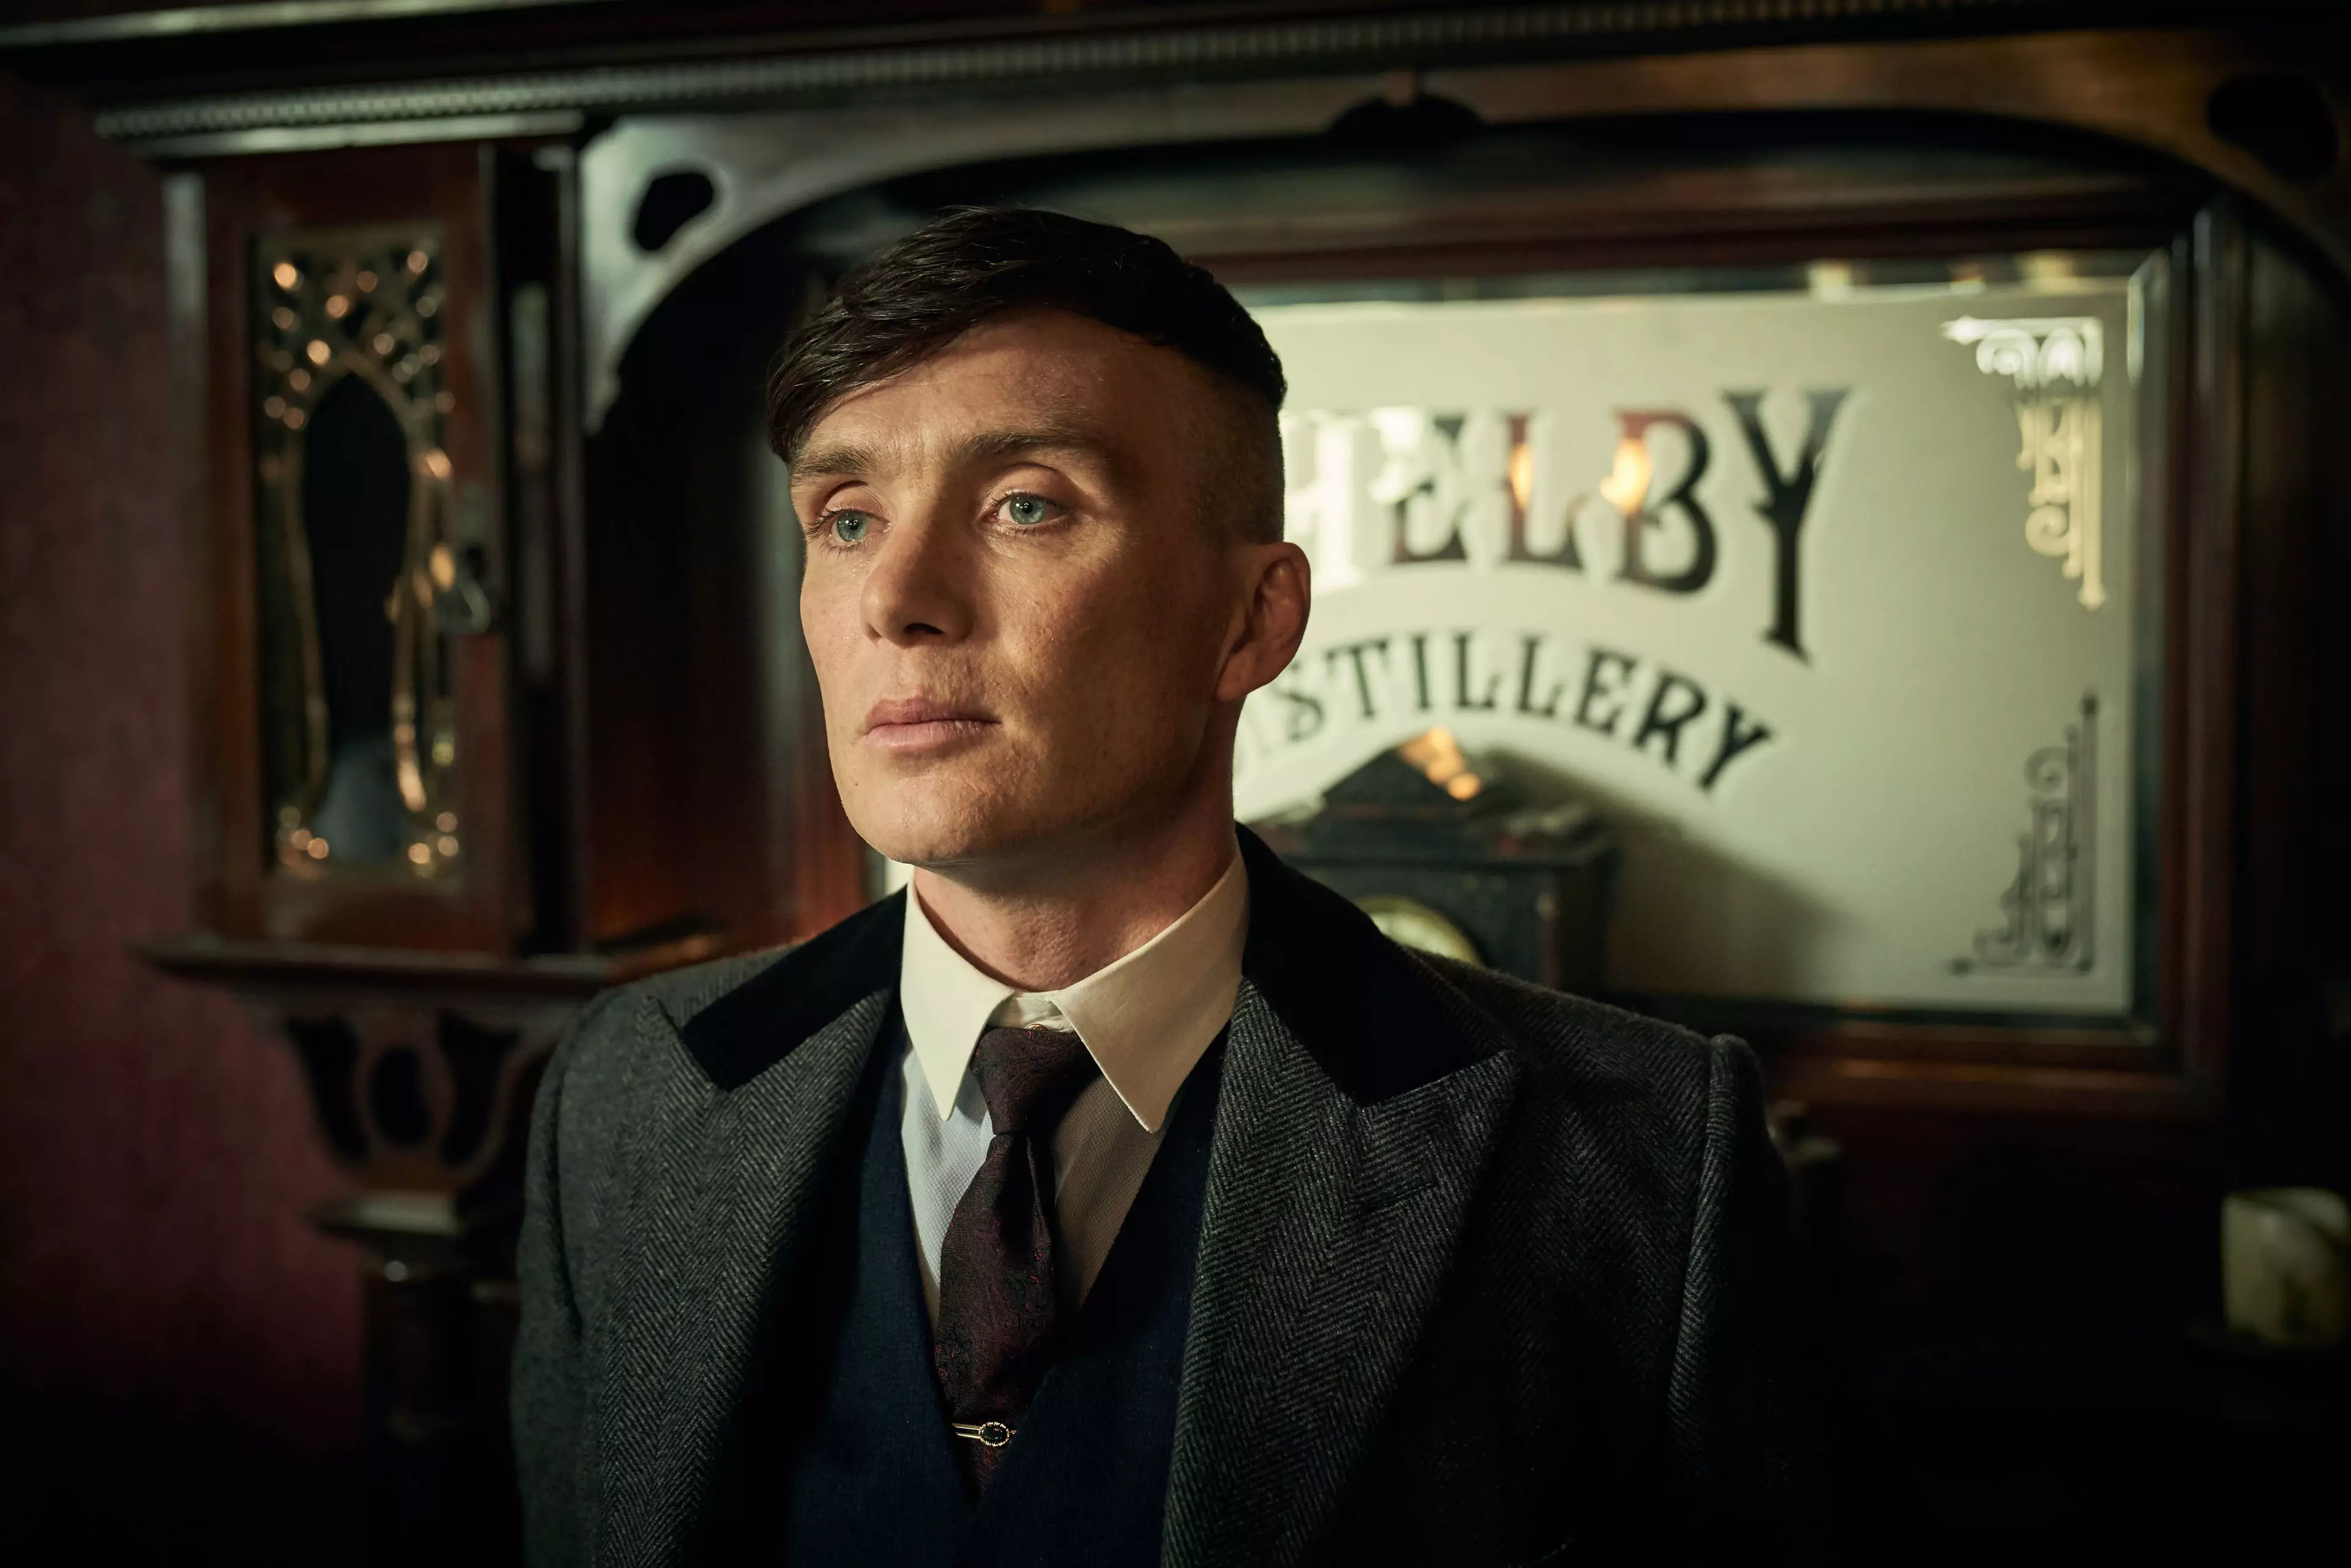 Cillian Murphy said it is exhausting playing Tommy Shelby.